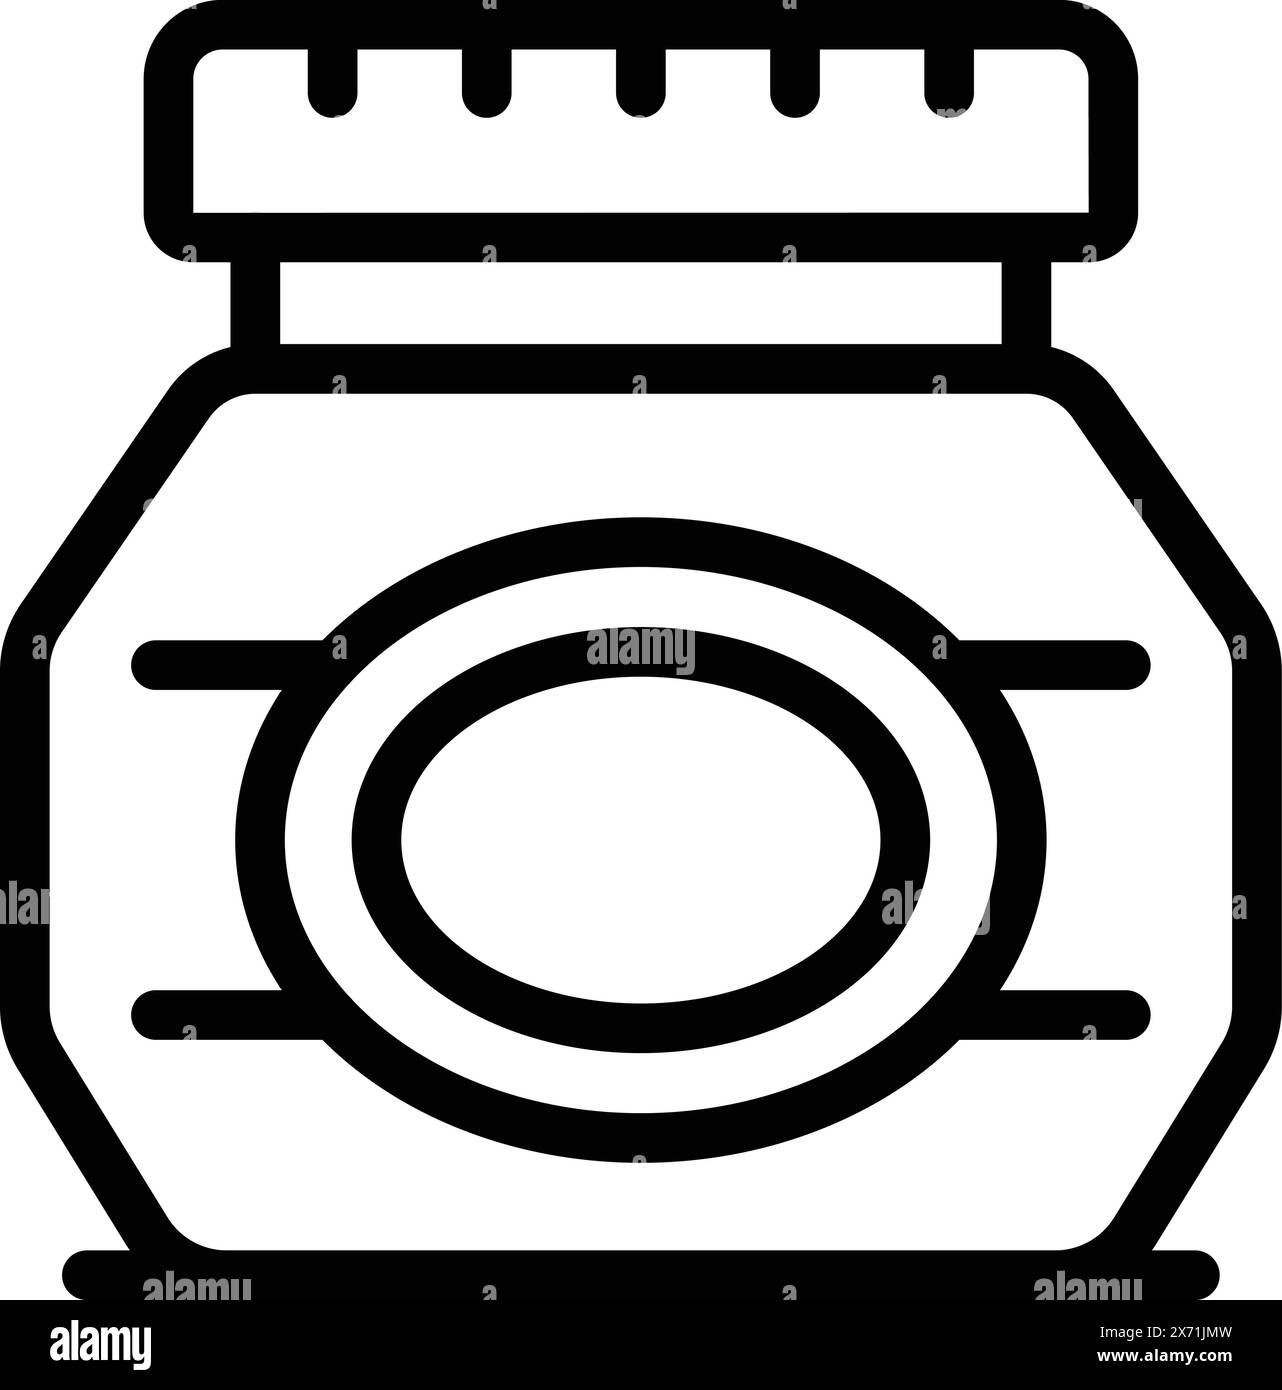 Vector illustration of a simple jar outline suitable for icons, logos, and designs Stock Vector